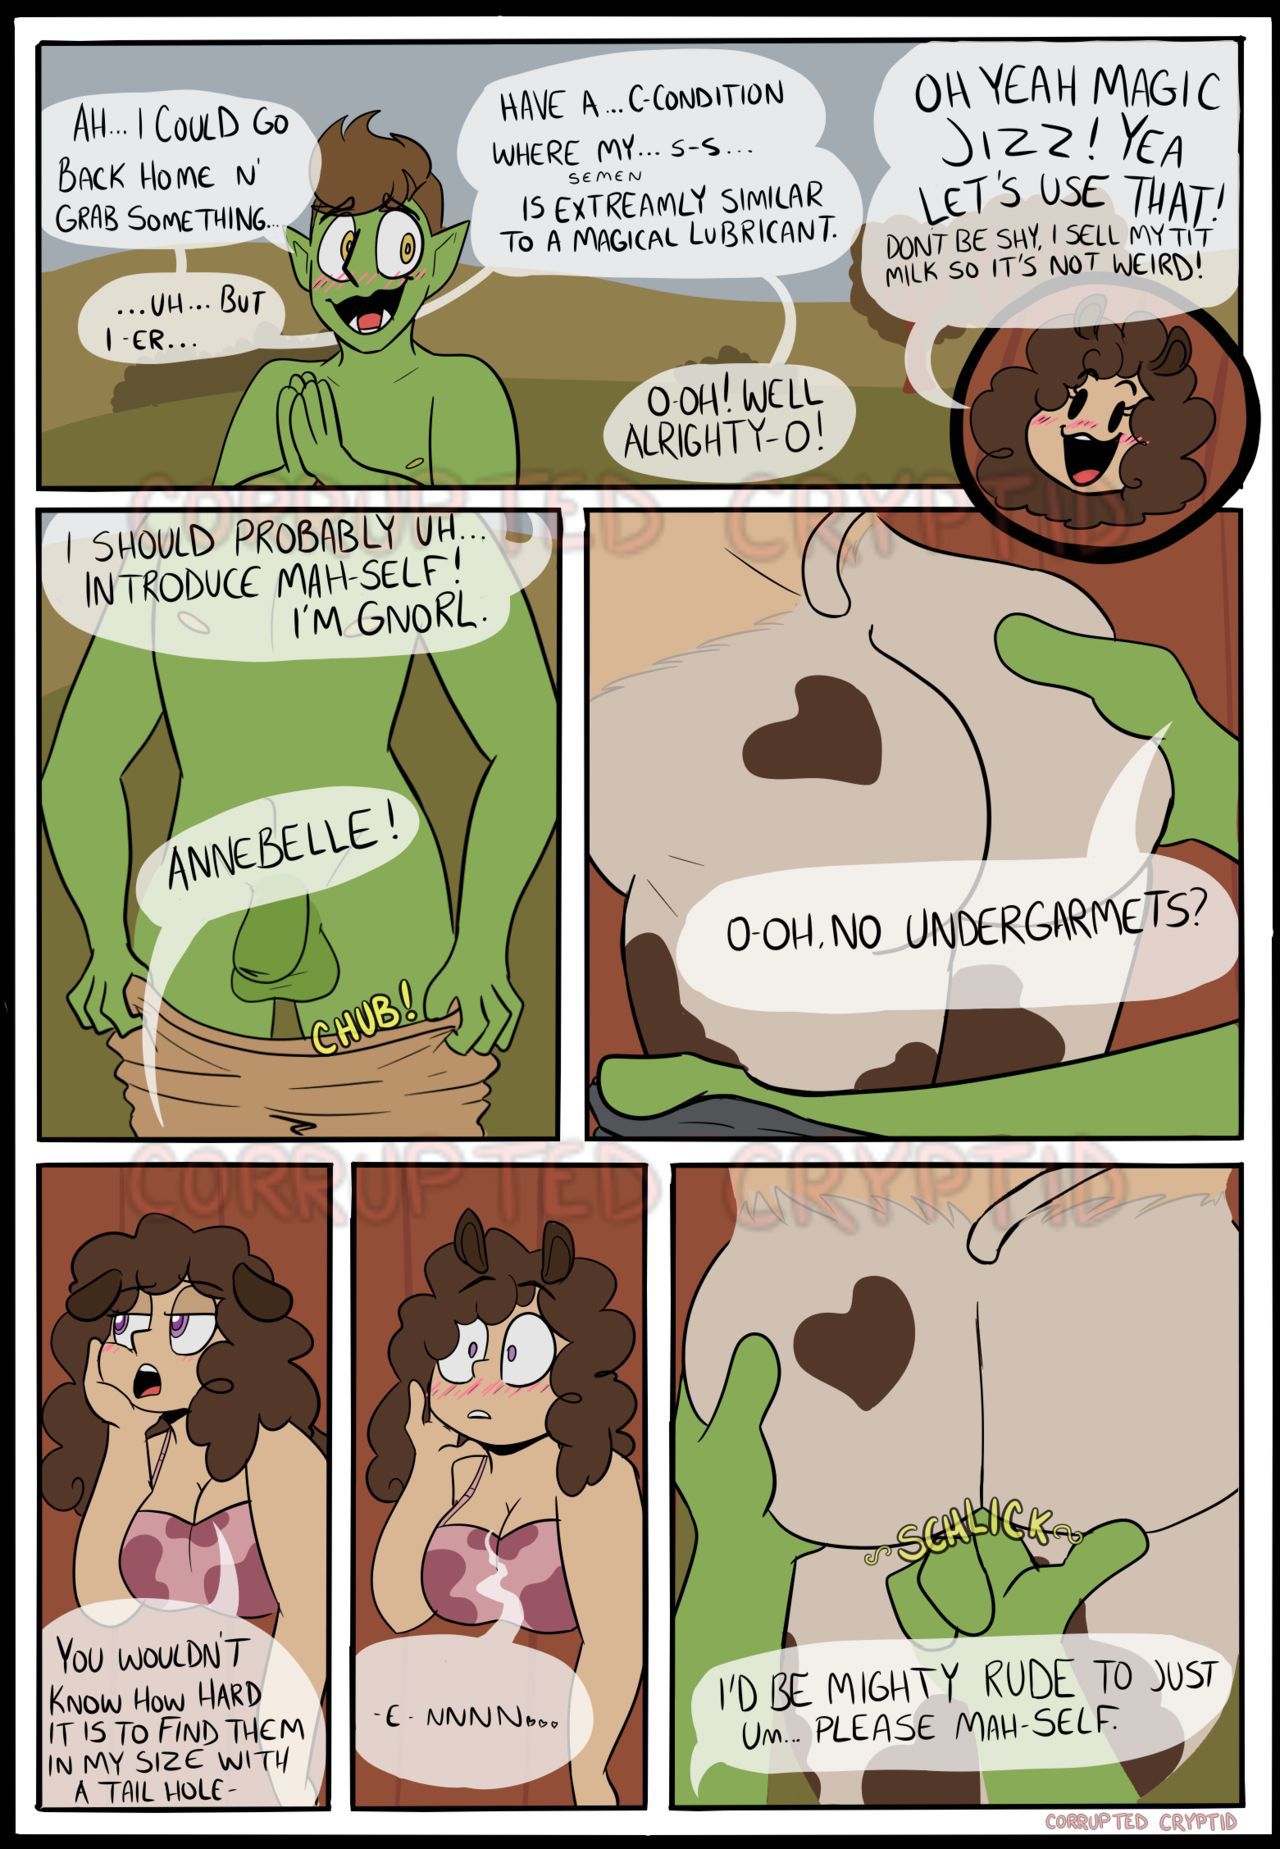 [CorruptedCryptid] Annebelle's Adventure (NSFW Comic) (Ongoing) 3